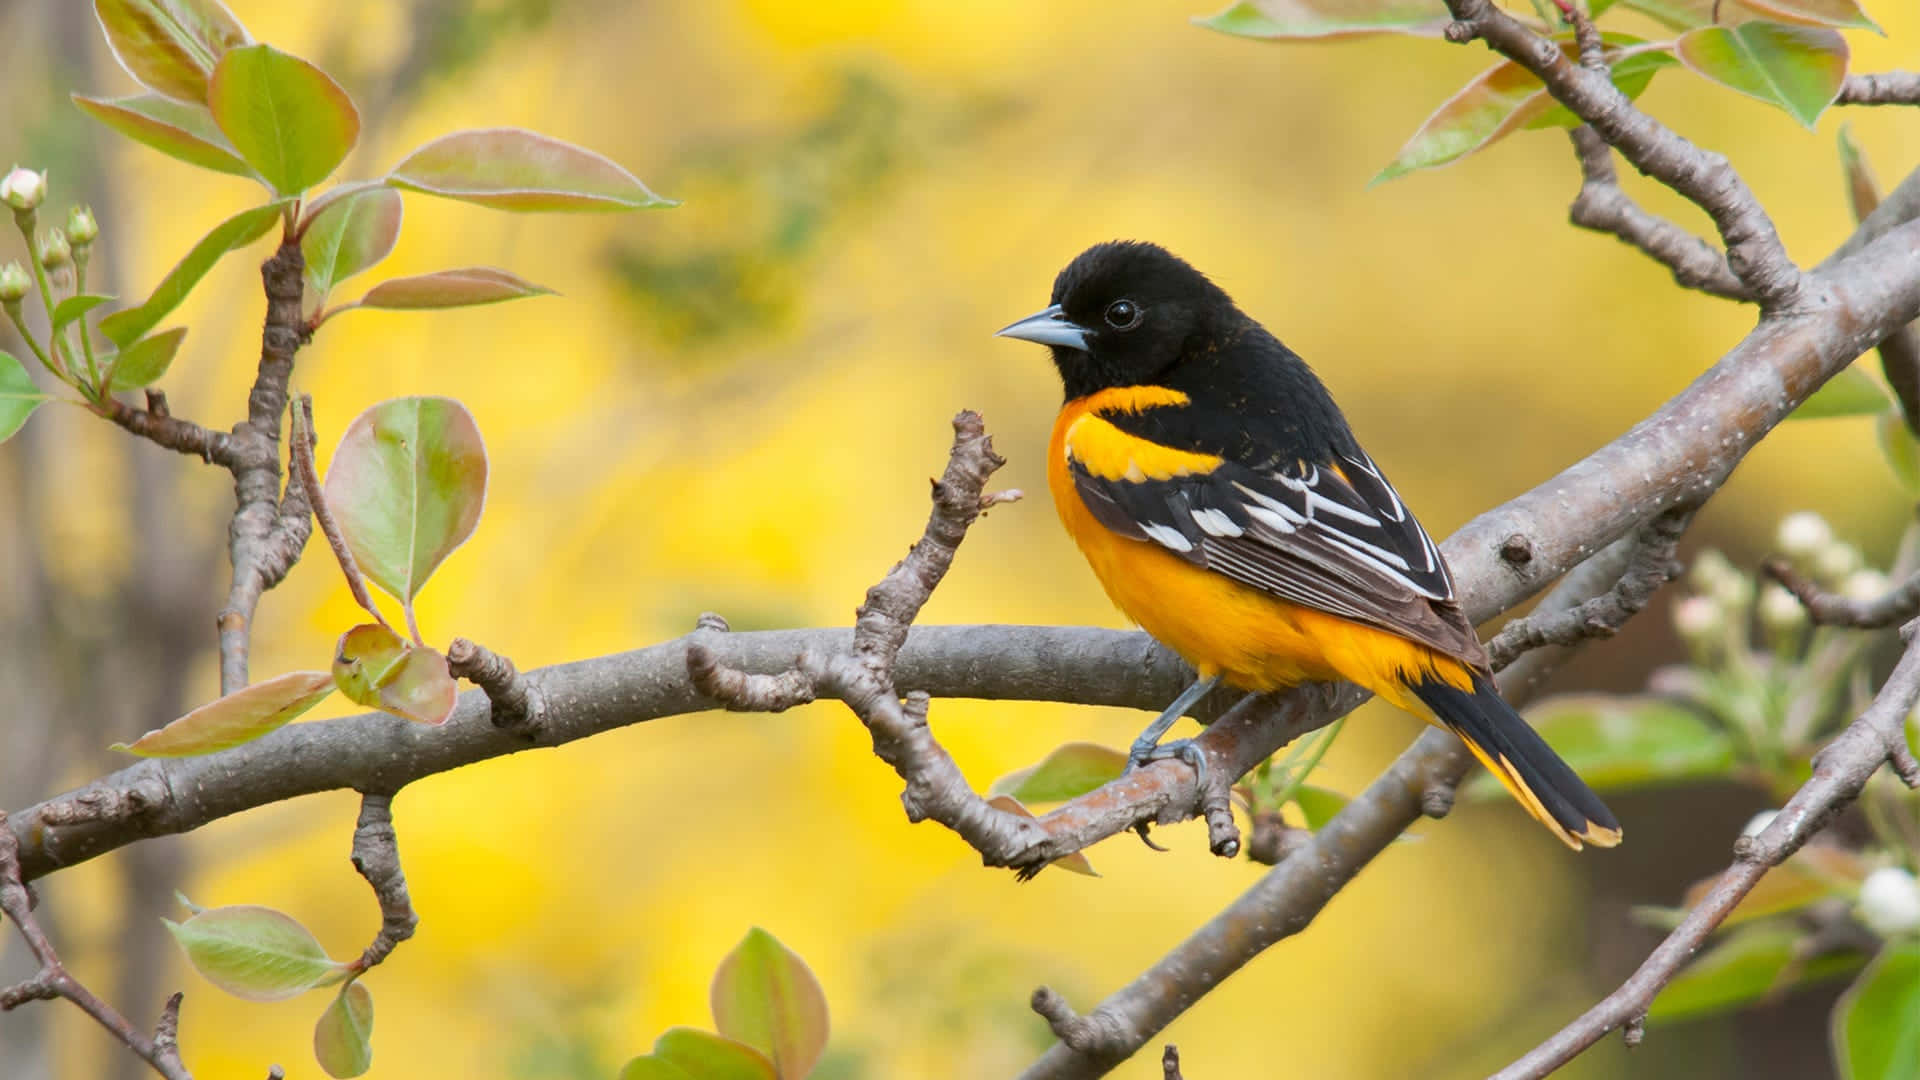 A male Baltimore Oriole perched on a branch against a vibrant blue sky